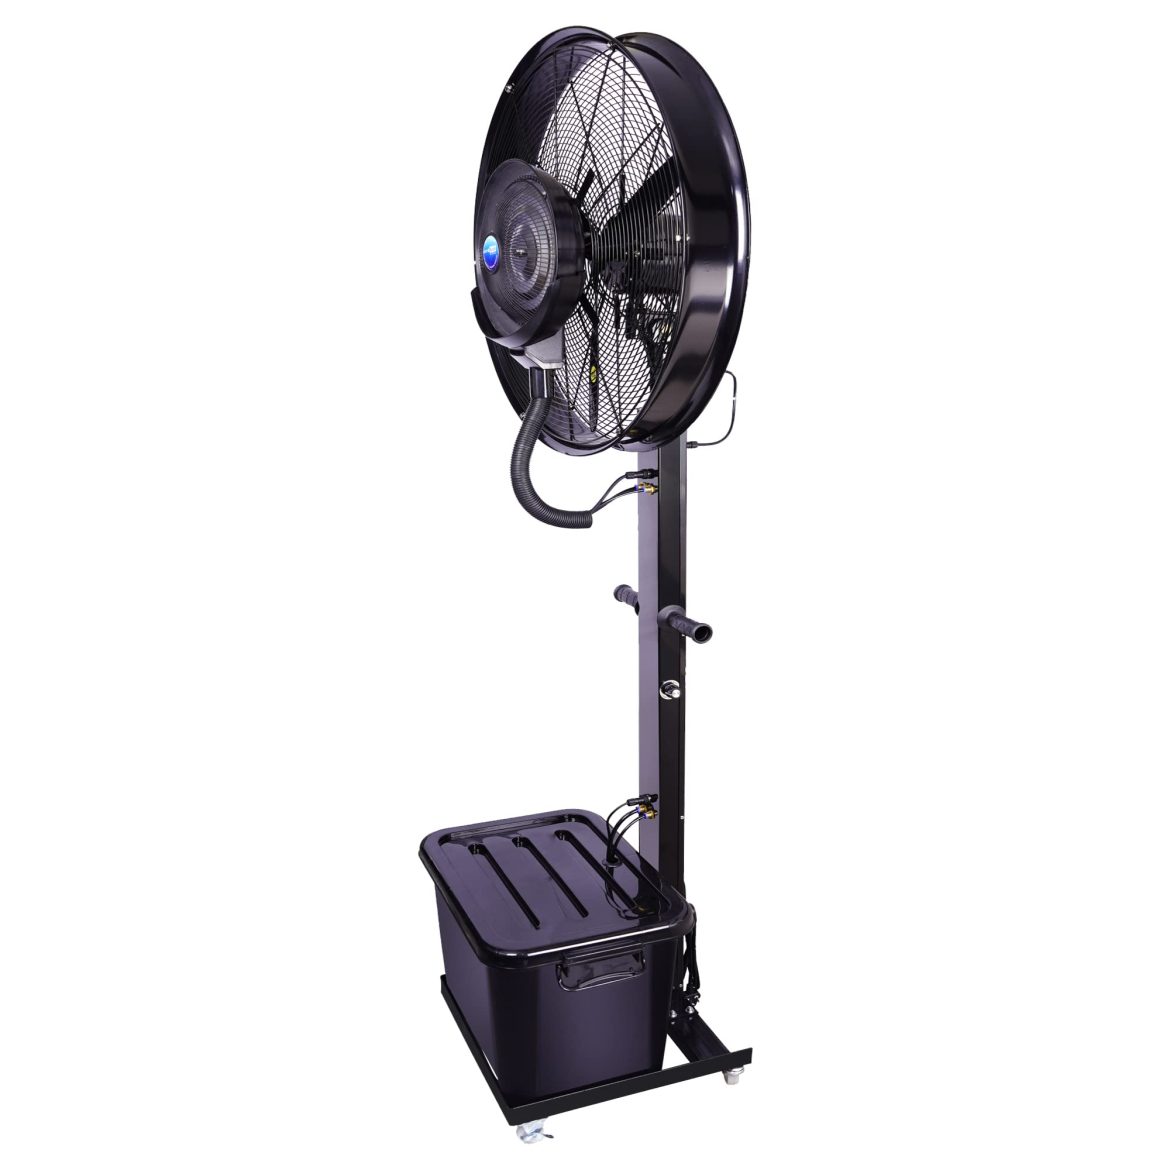 A Stand Fan With Water Spray Is a Great Way to Cool Down